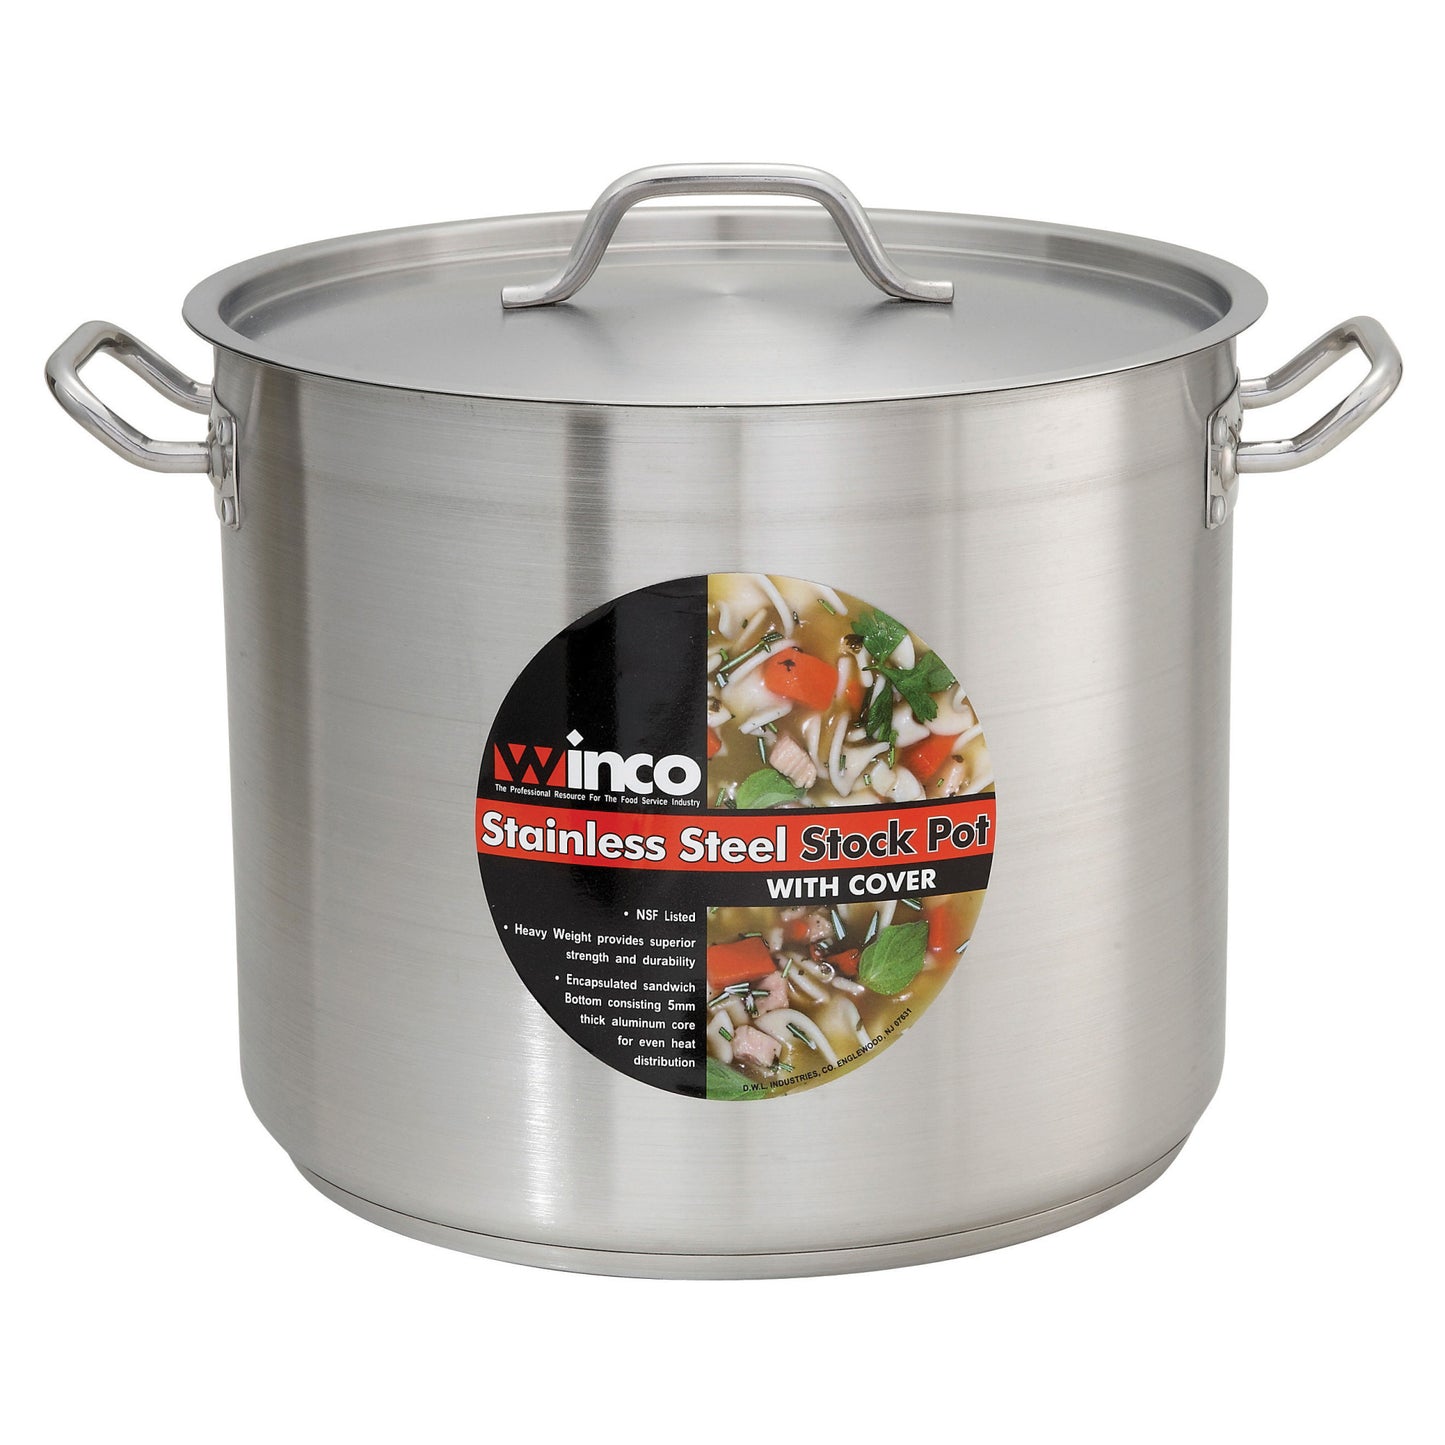 SST-16 - Stainless Steel Stock Pot with Cover - 16 Quart